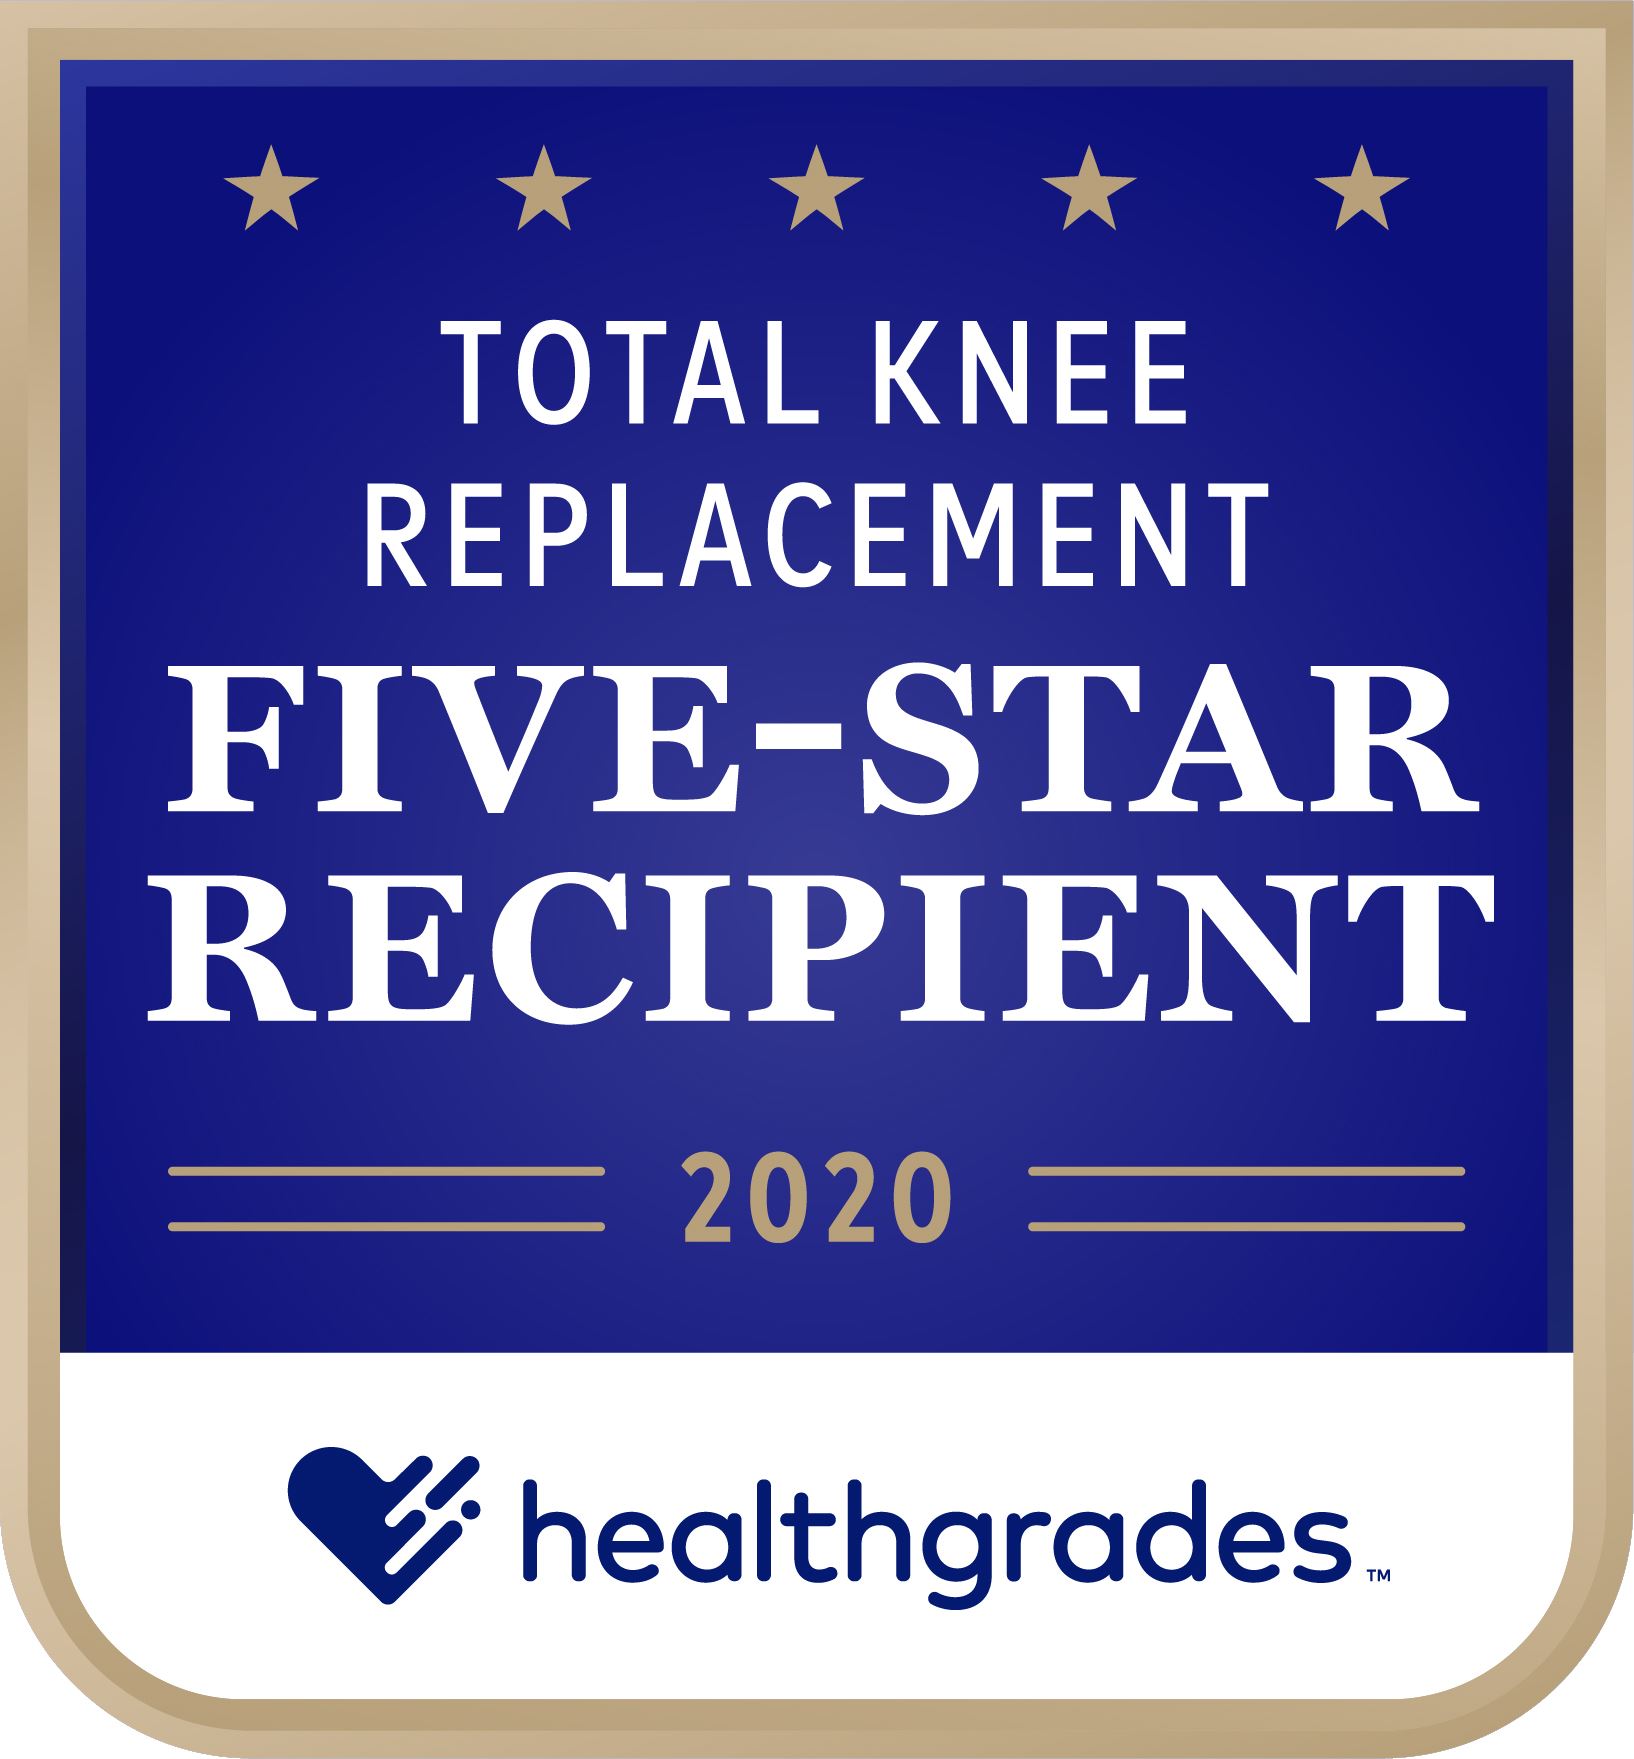 HG Five Star For Total Knee Replacement Image 2020